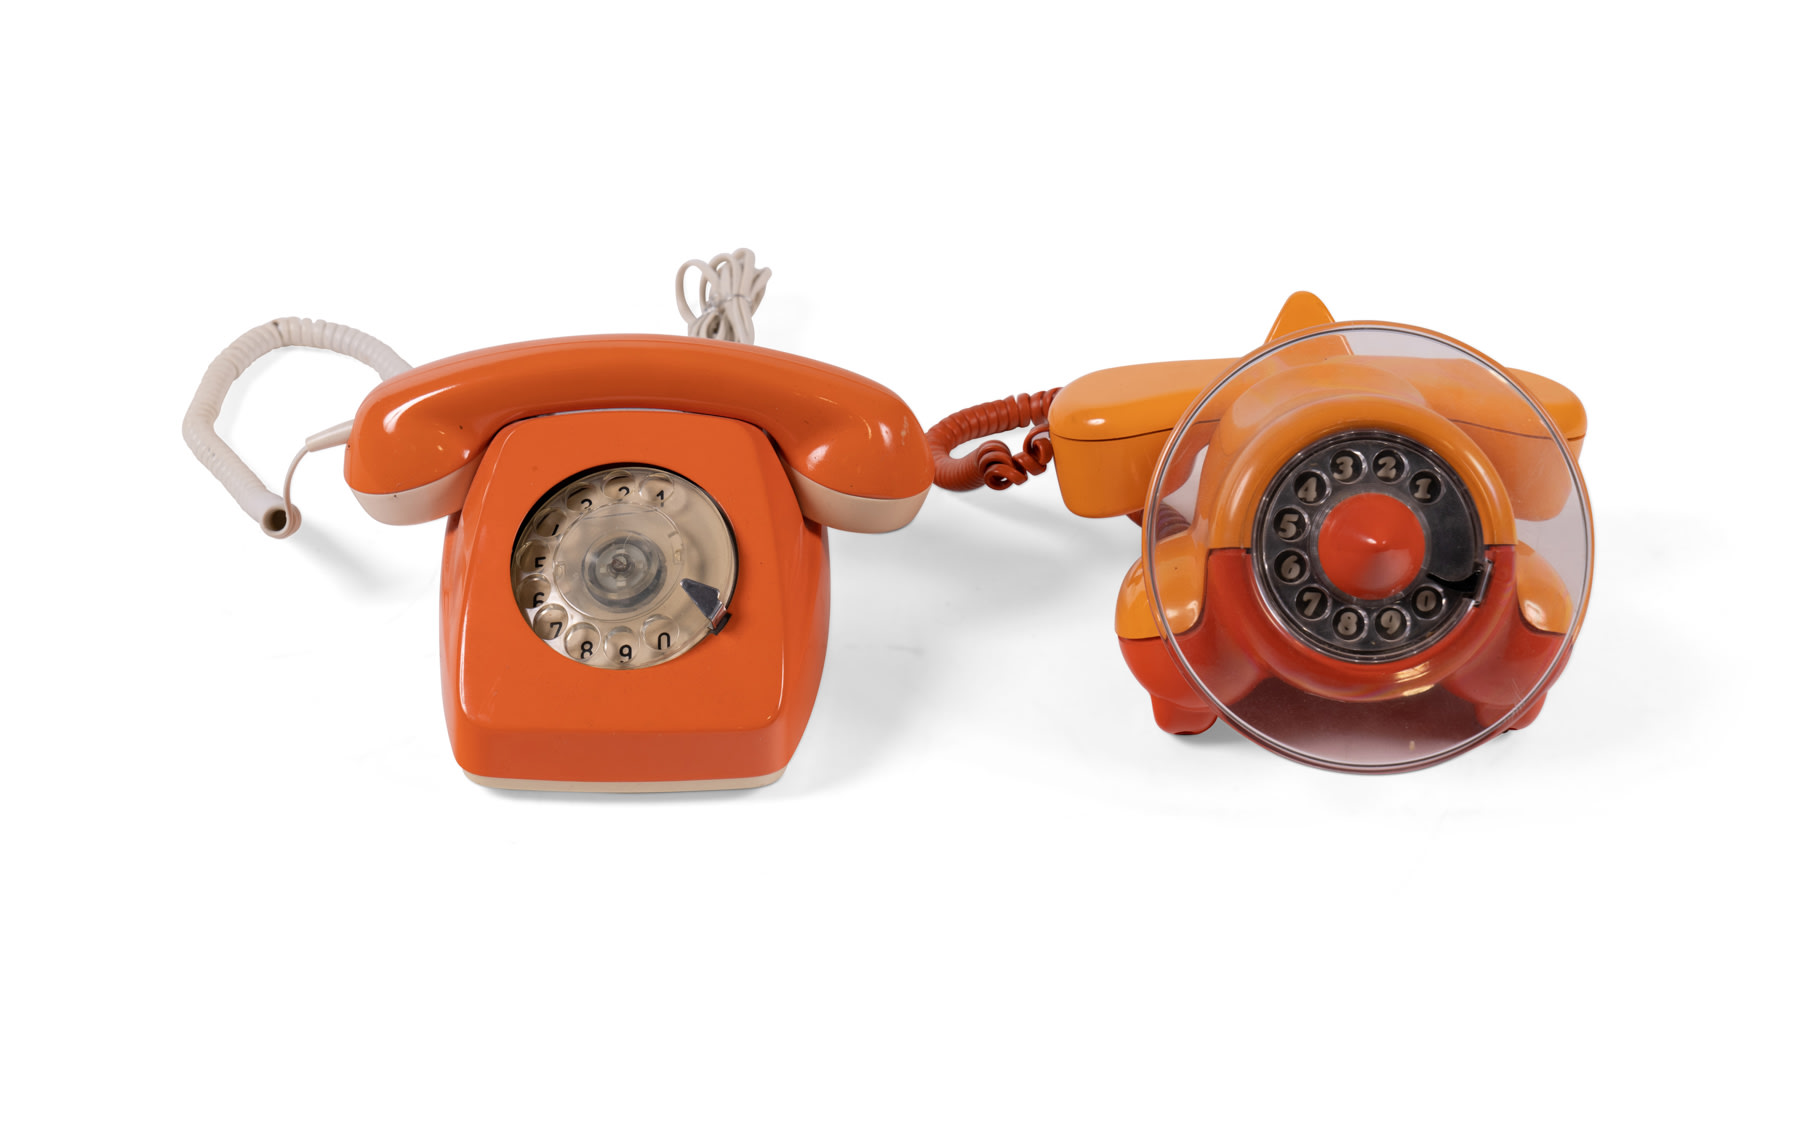 Two Vintage-Style Rotary Telephones